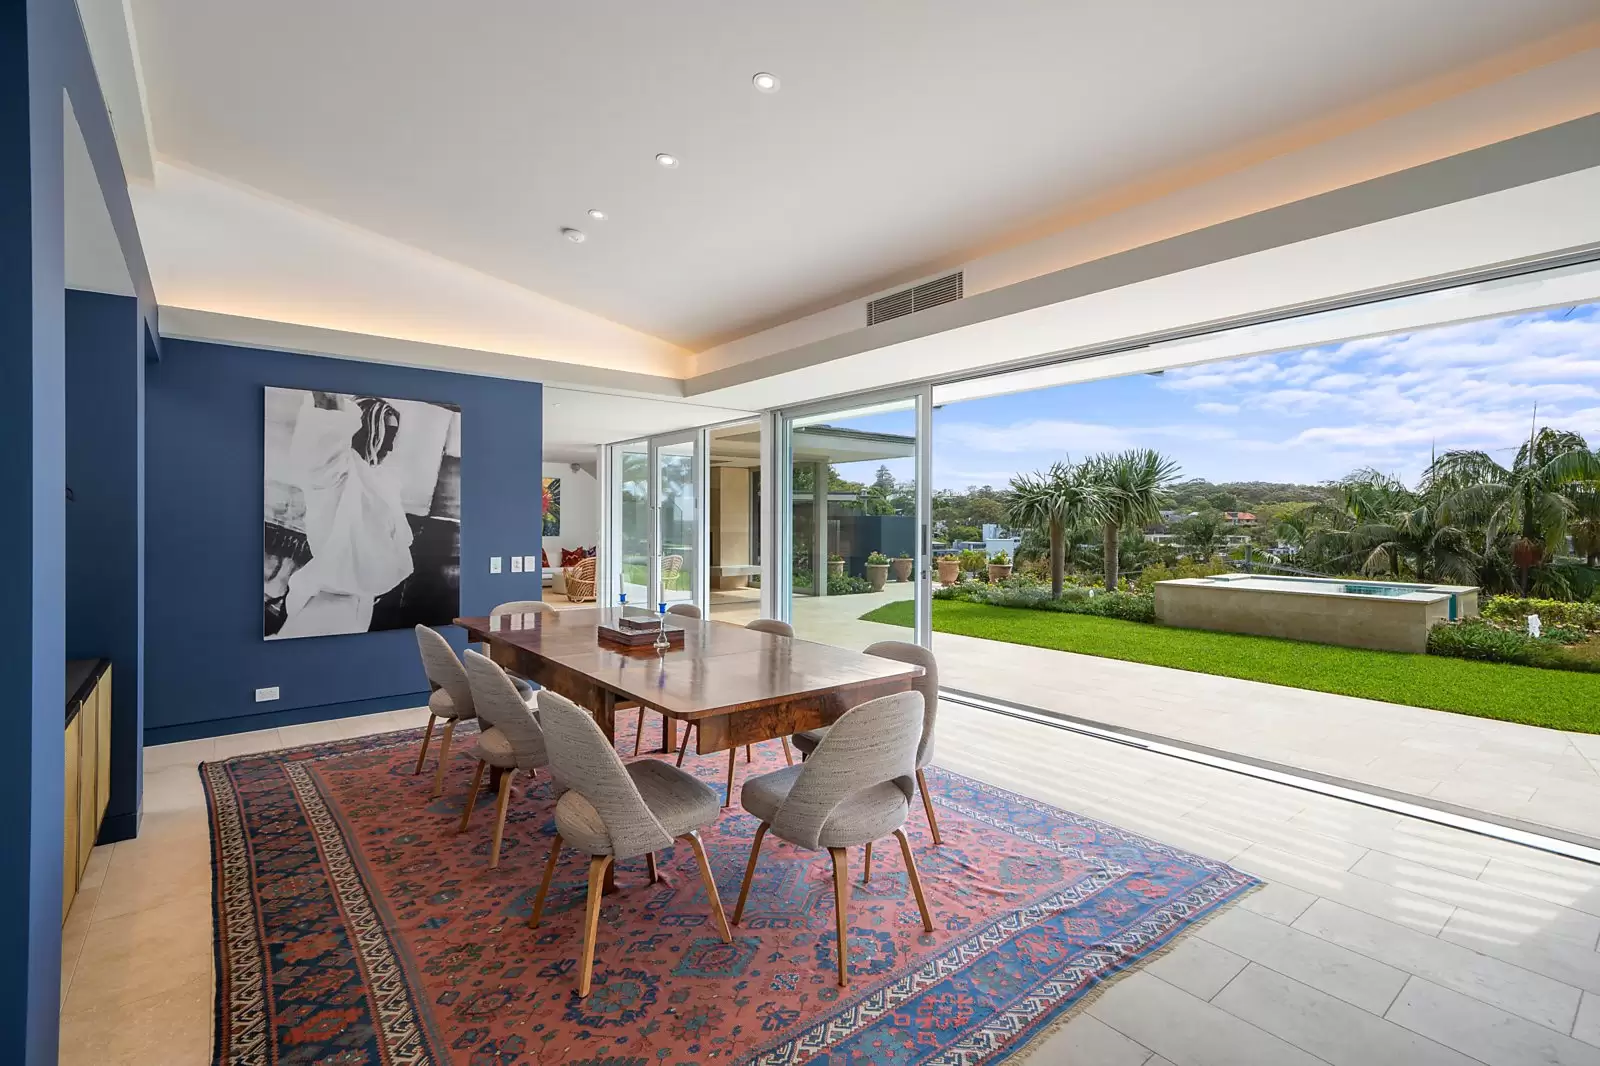 Photo #11: 97 Wentworth Road, Vaucluse - For Sale by Sydney Sotheby's International Realty